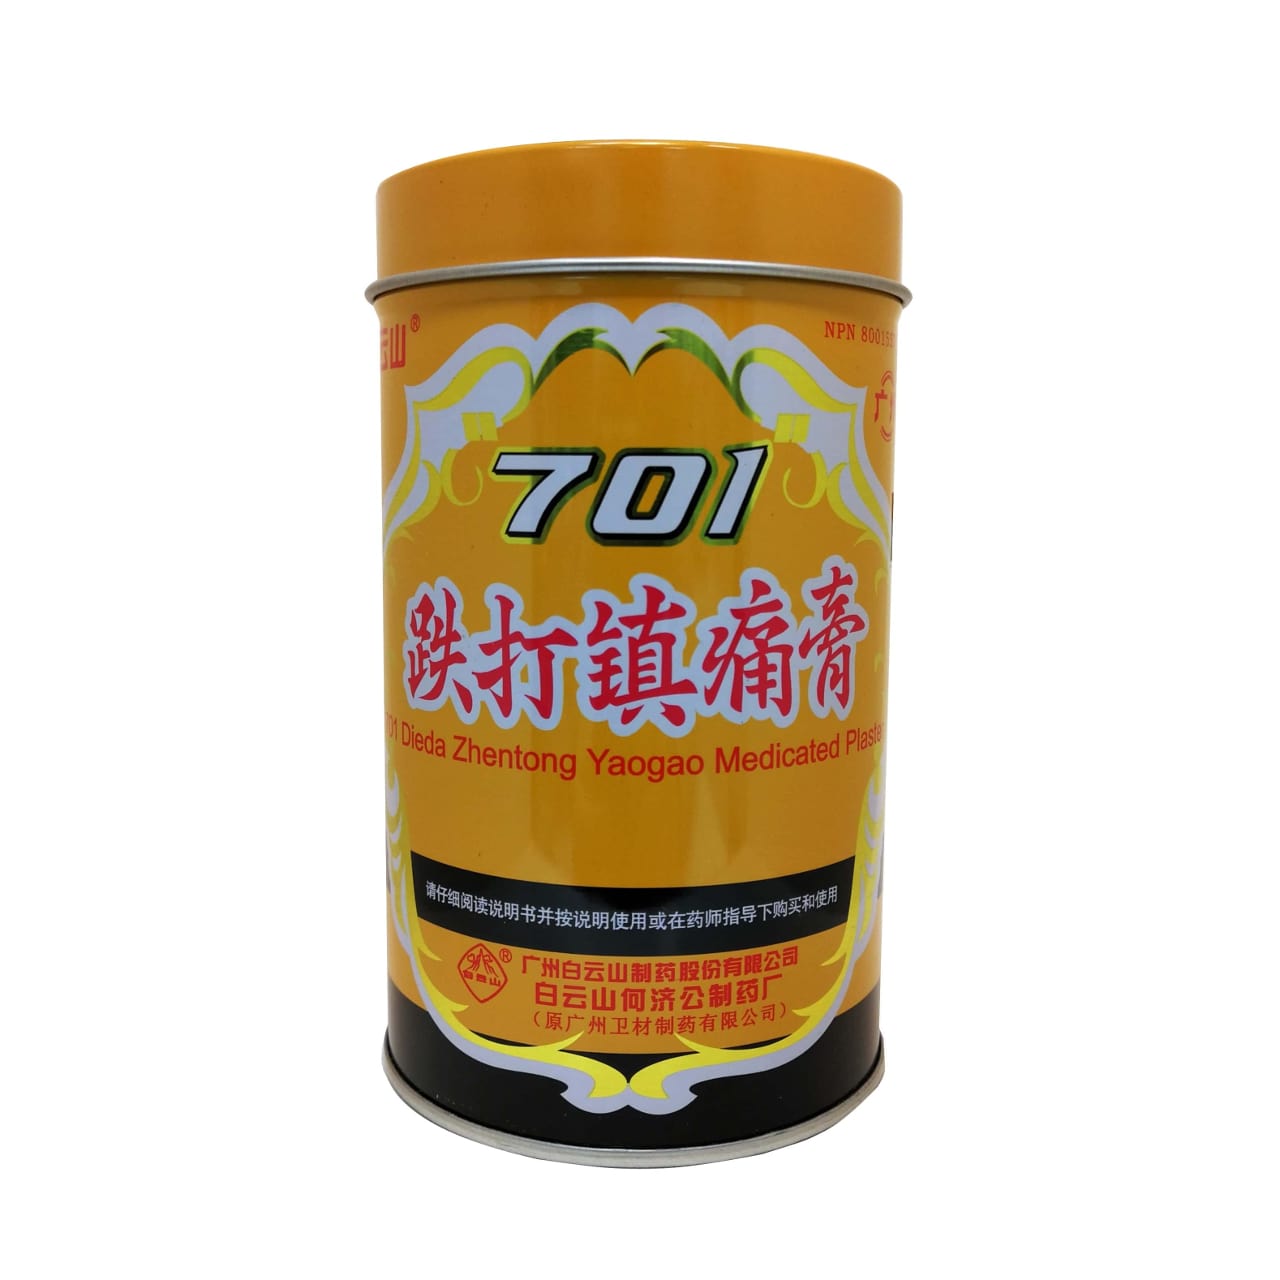 Main Label for 701 Dieda Zhentong Yaogao Chinese medicated plasters.